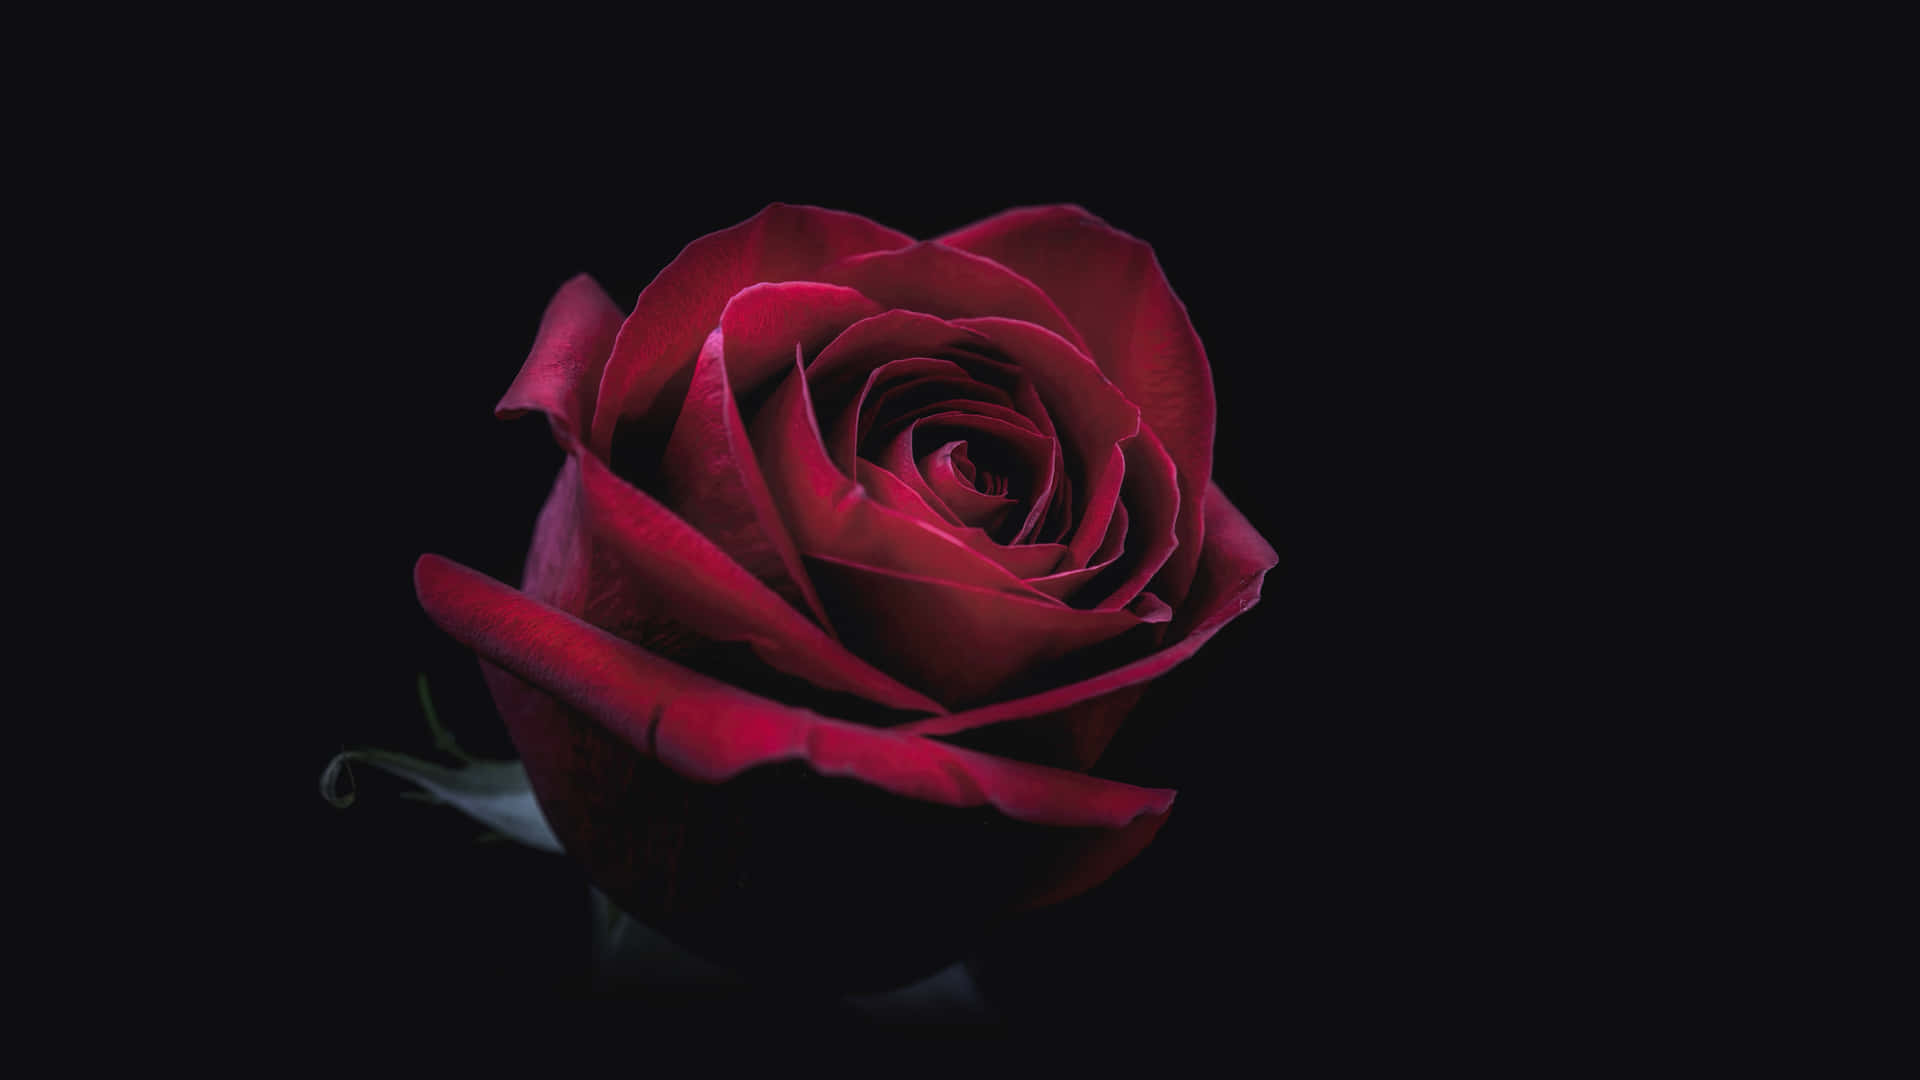 A Red Rose On A Black Background Wallpaper